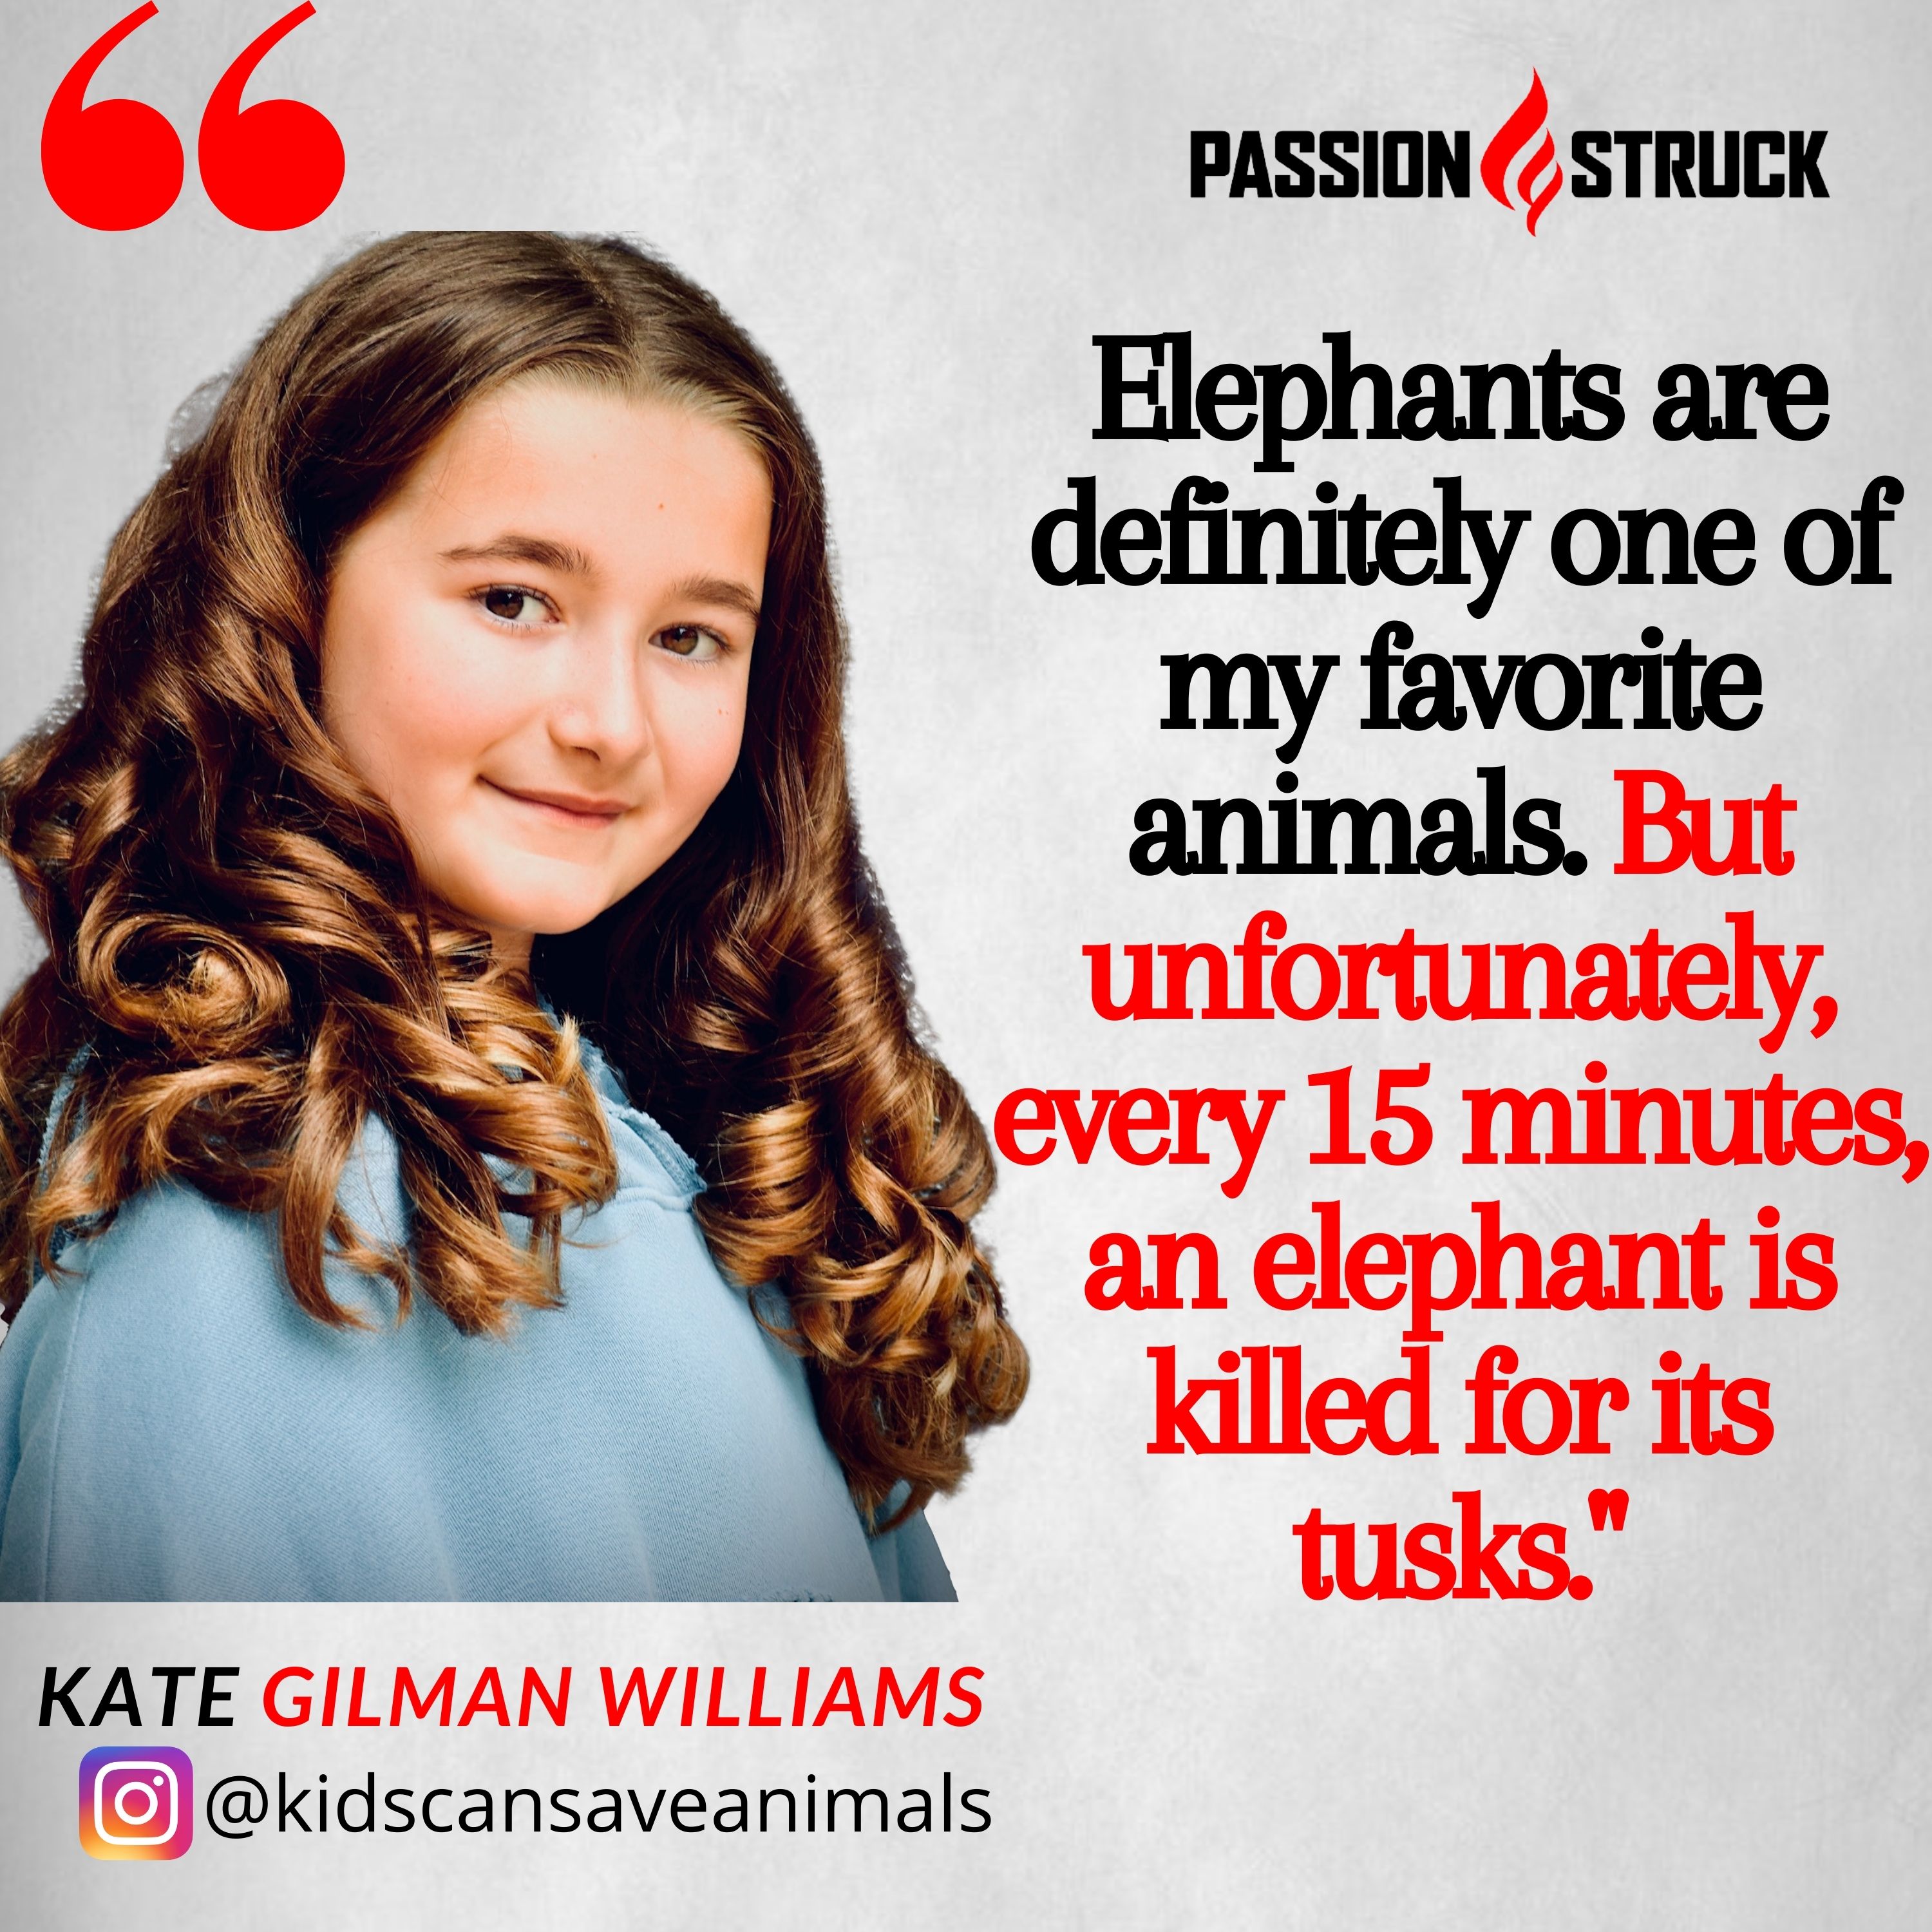 Kate Gilman Williams quote from Passion Struck on how every 15 minutes an elephant dies